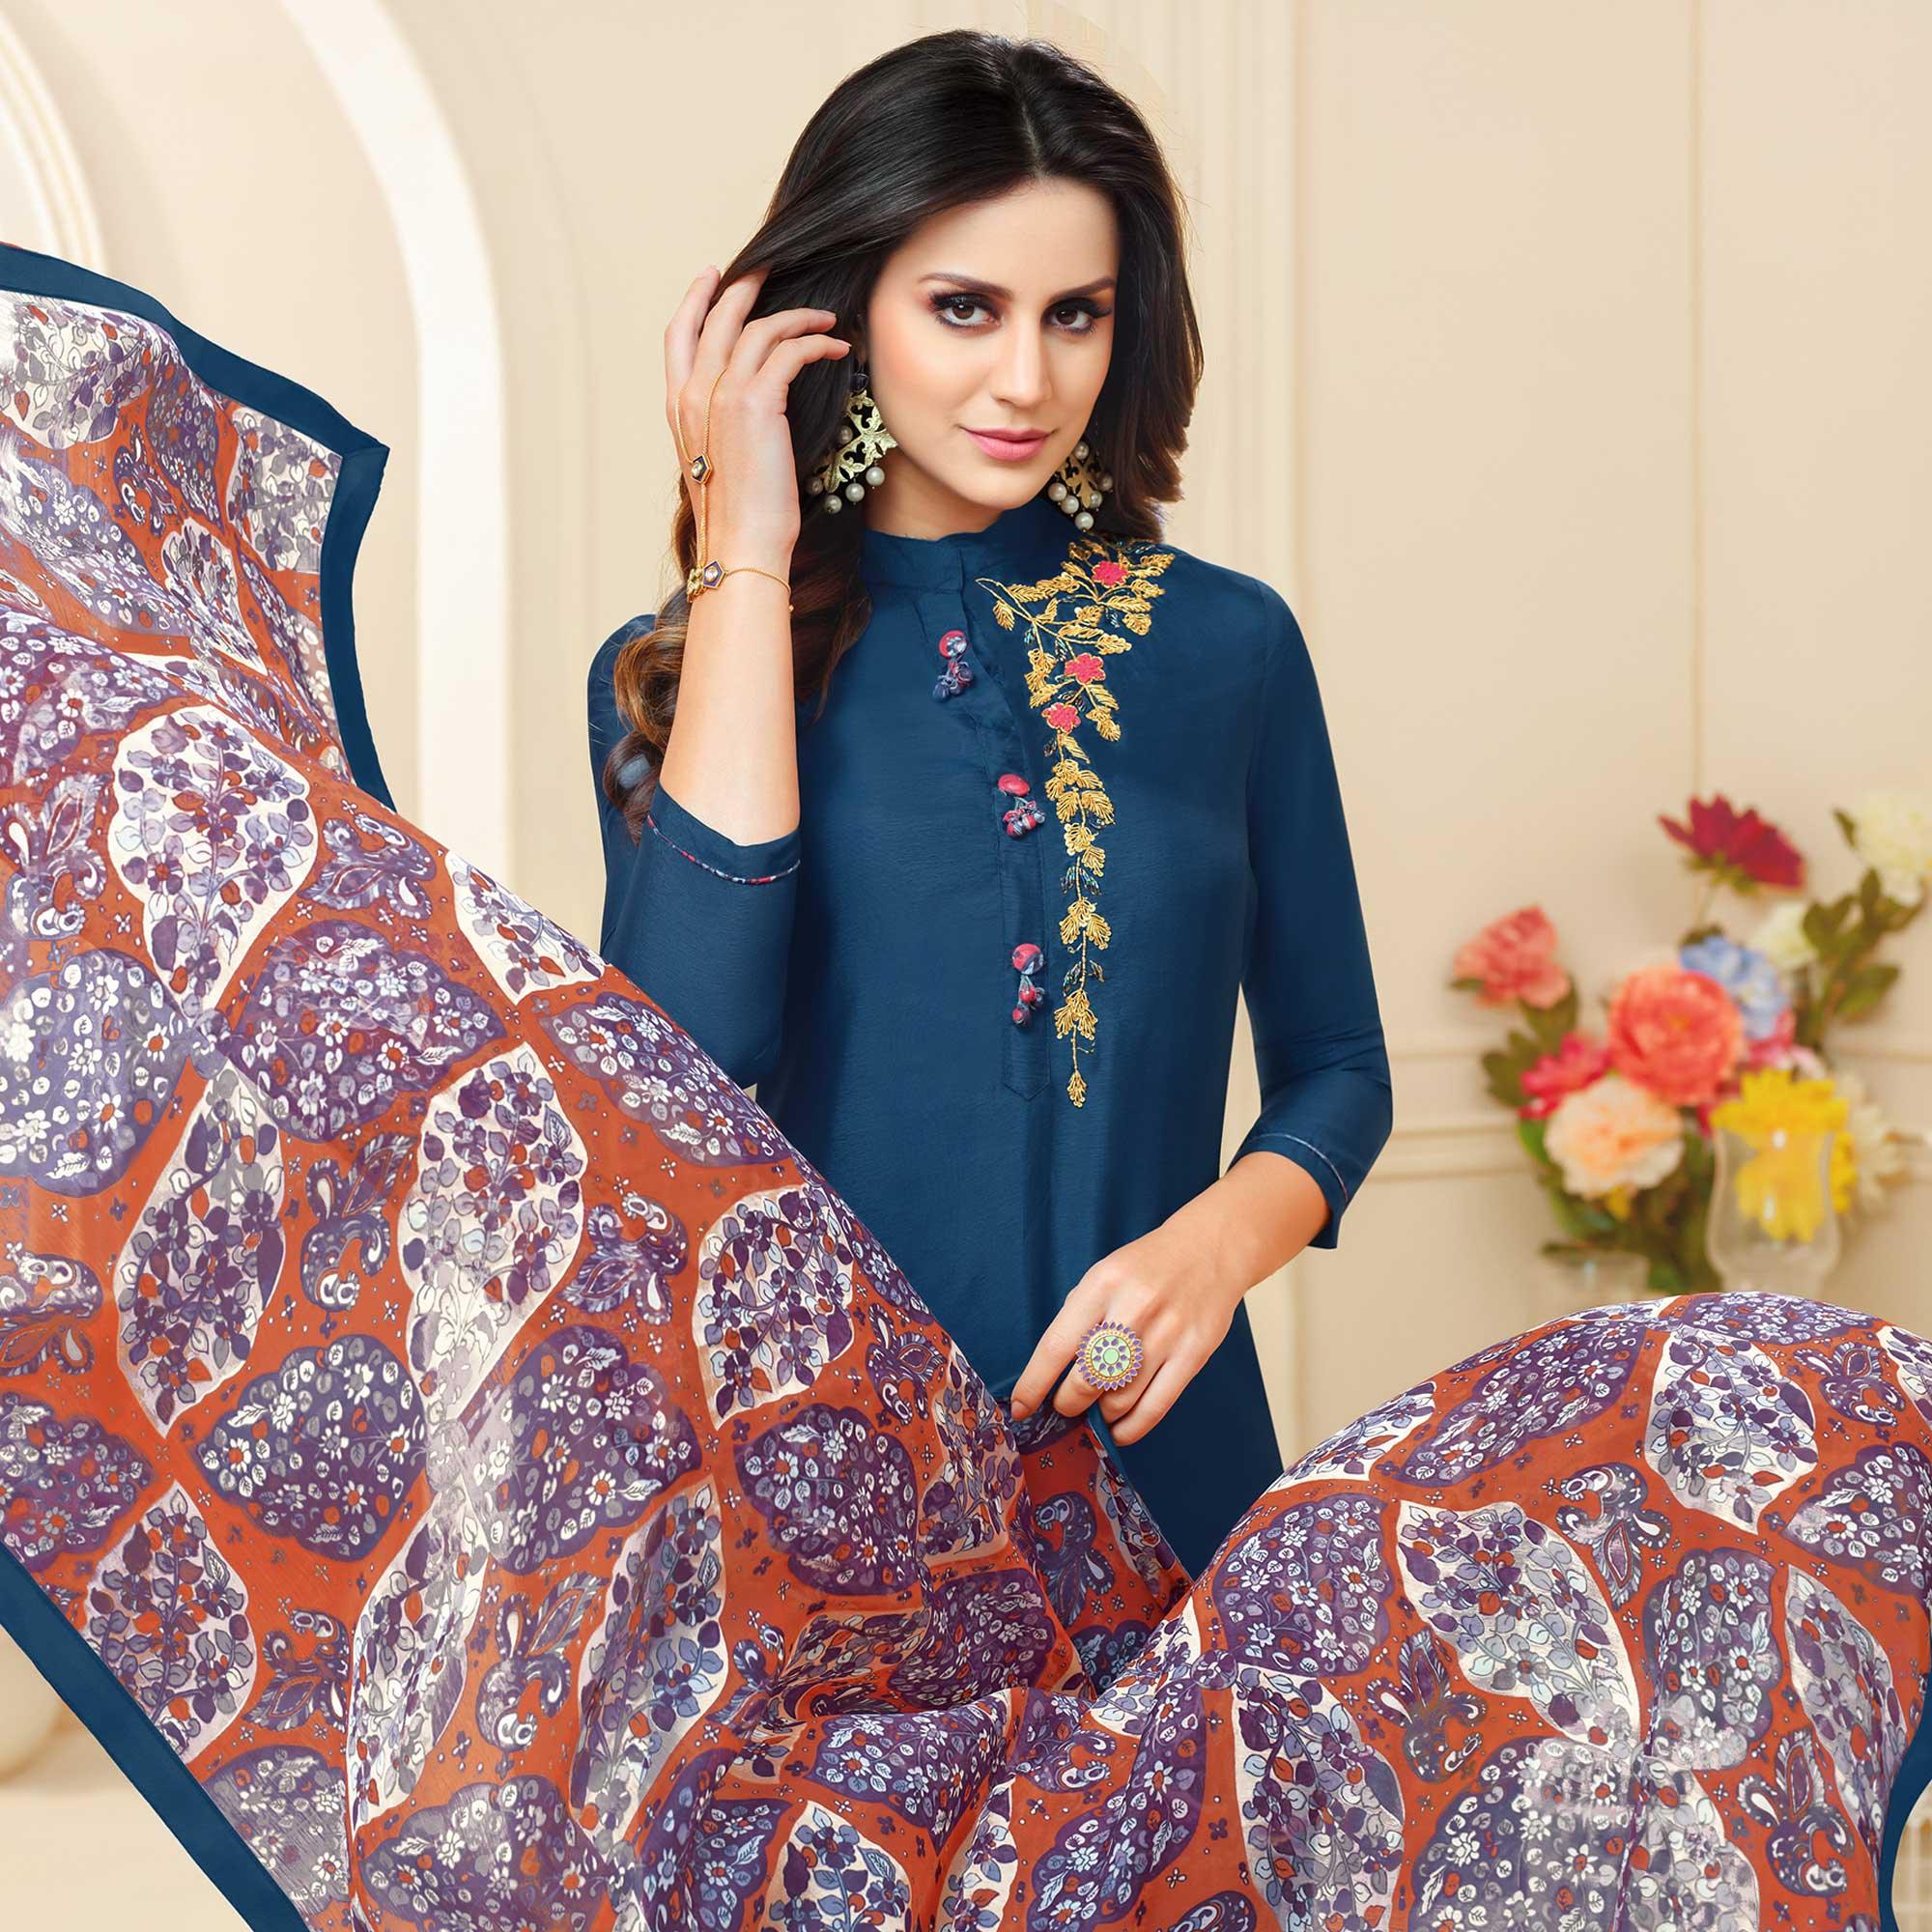 Marvellous Teal Blue Colored Casual Wear Printed Chanderi Dress Material - Peachmode